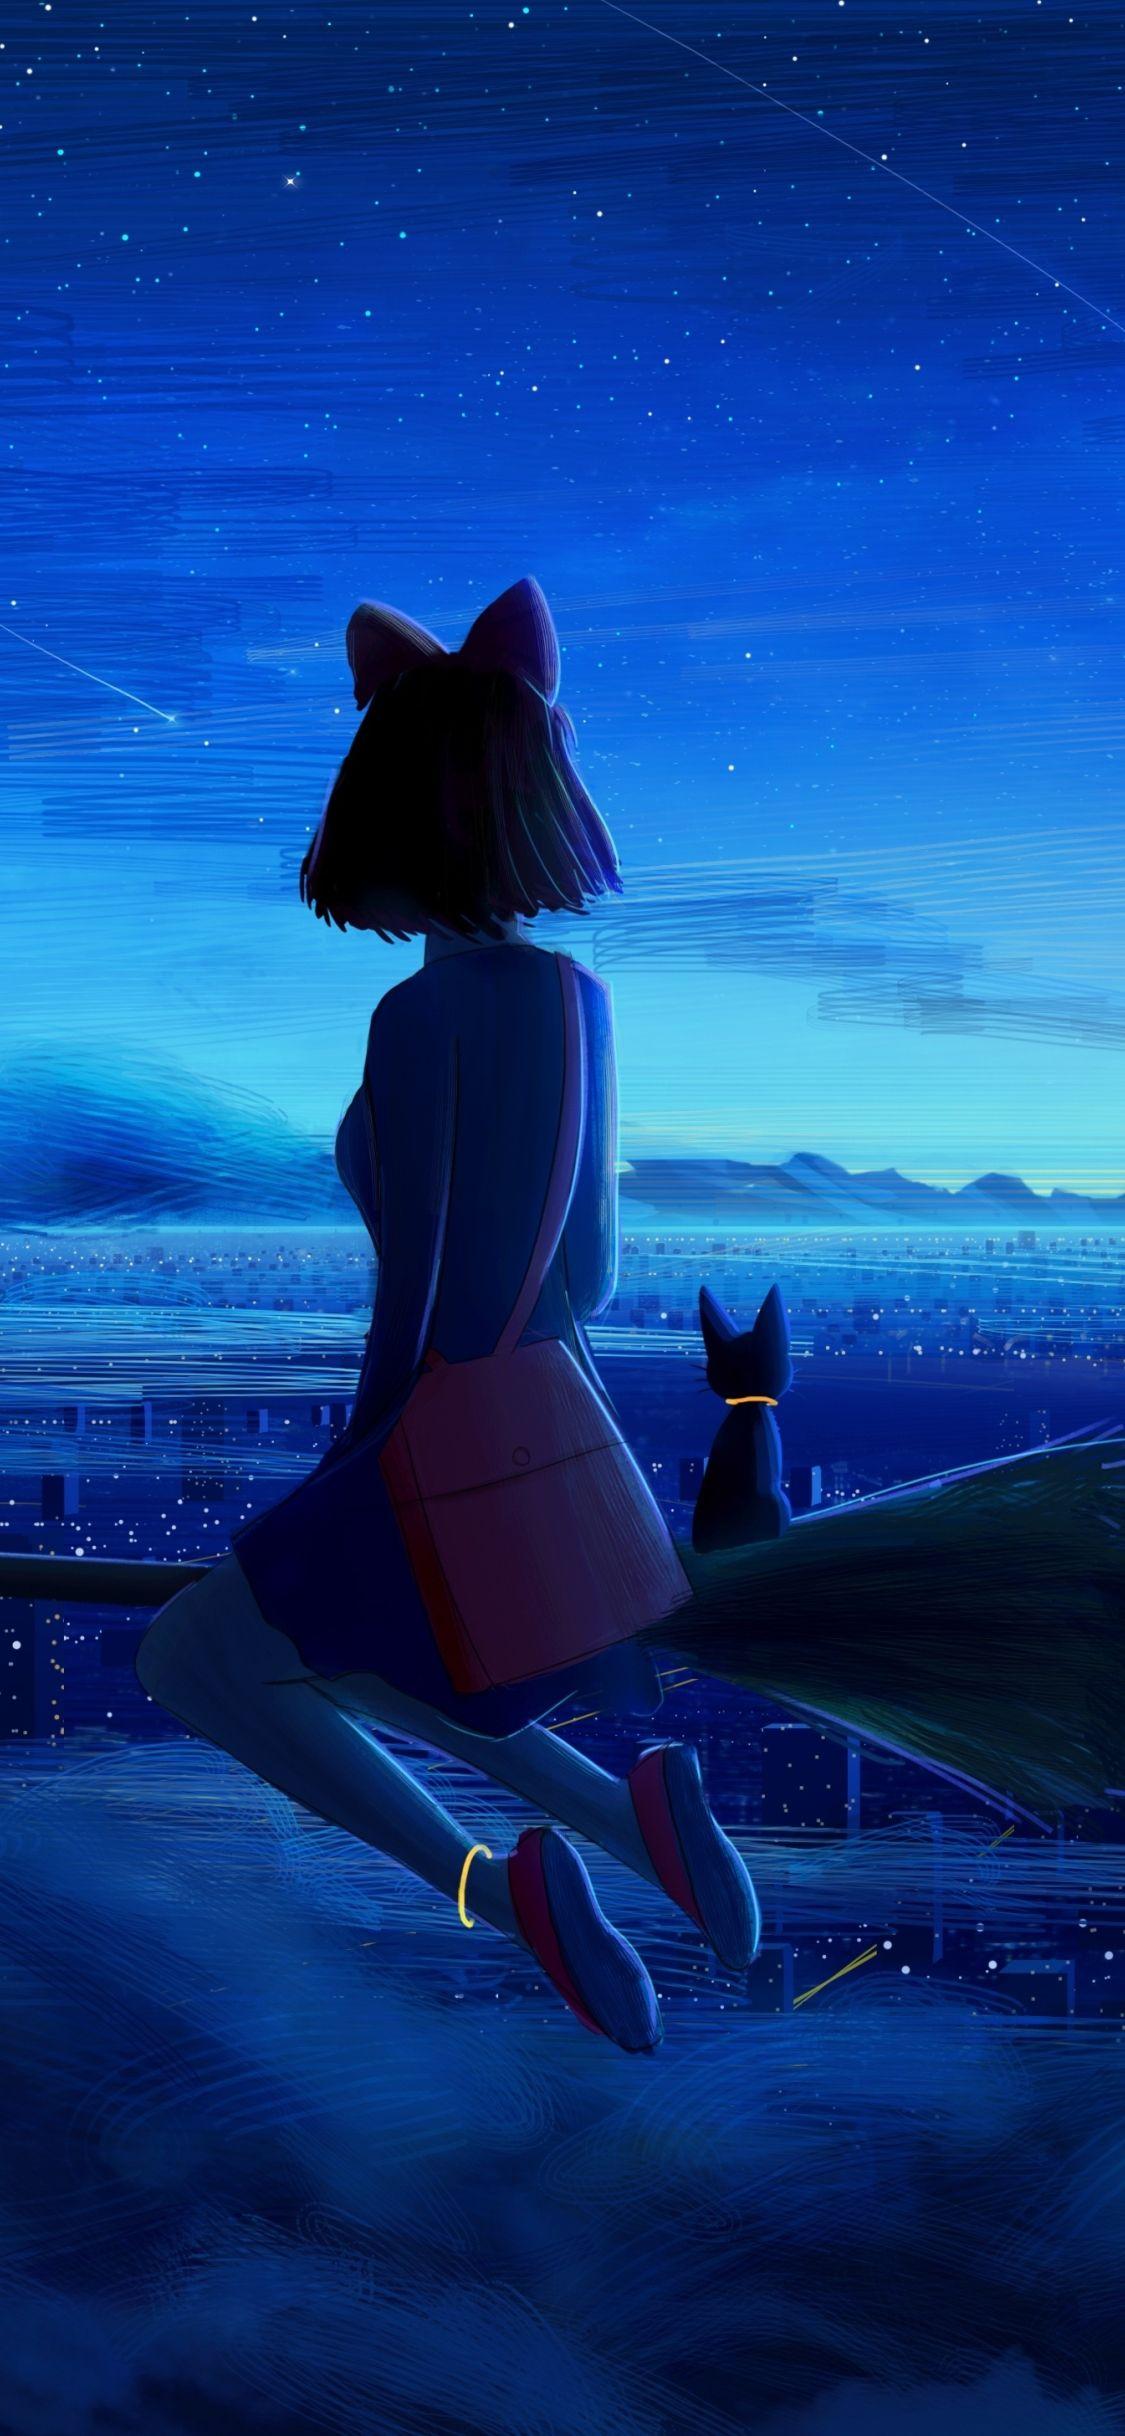 Kiki's Delivery Service iPhone Wallpapers - Top Free Kiki's Delivery